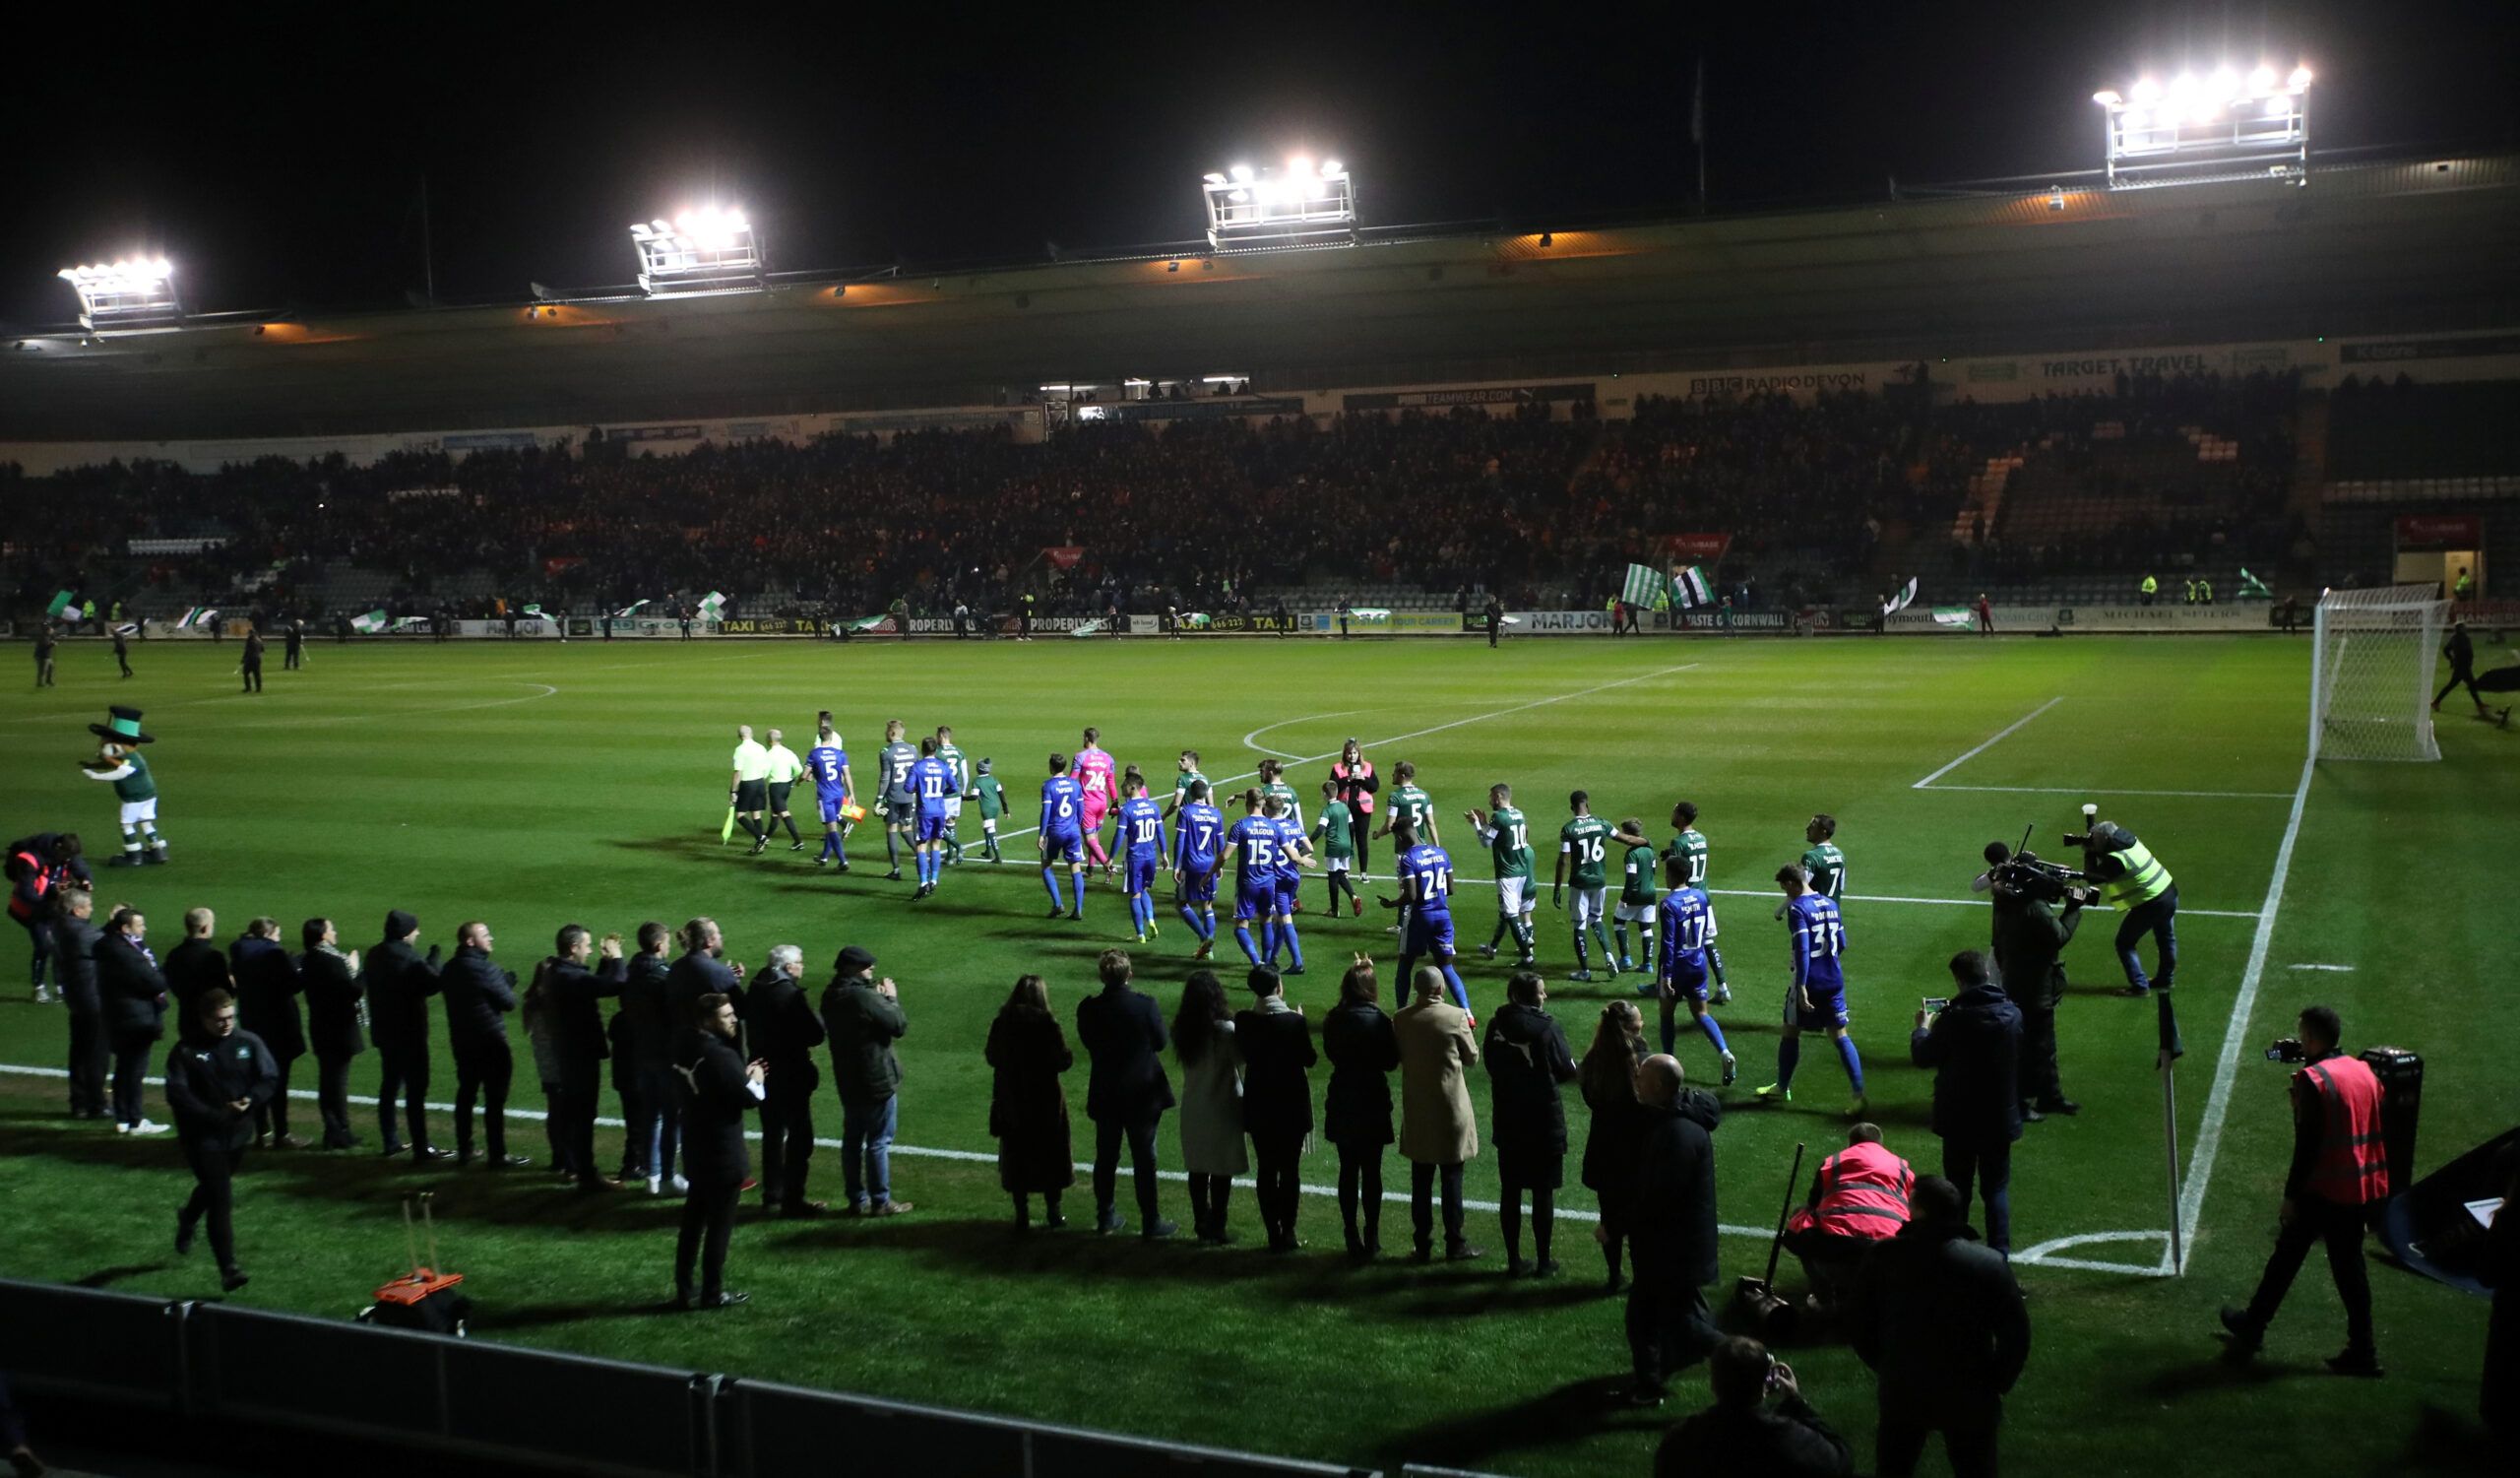 Soccer Football - FA Cup - Second Round Replay - Plymouth Argyle v Bristol Rovers - Home Park, Plymouth, Britain - December 17, 2019   General view before the match as the teams walk out onto the pitch   Action Images/Peter Cziborra